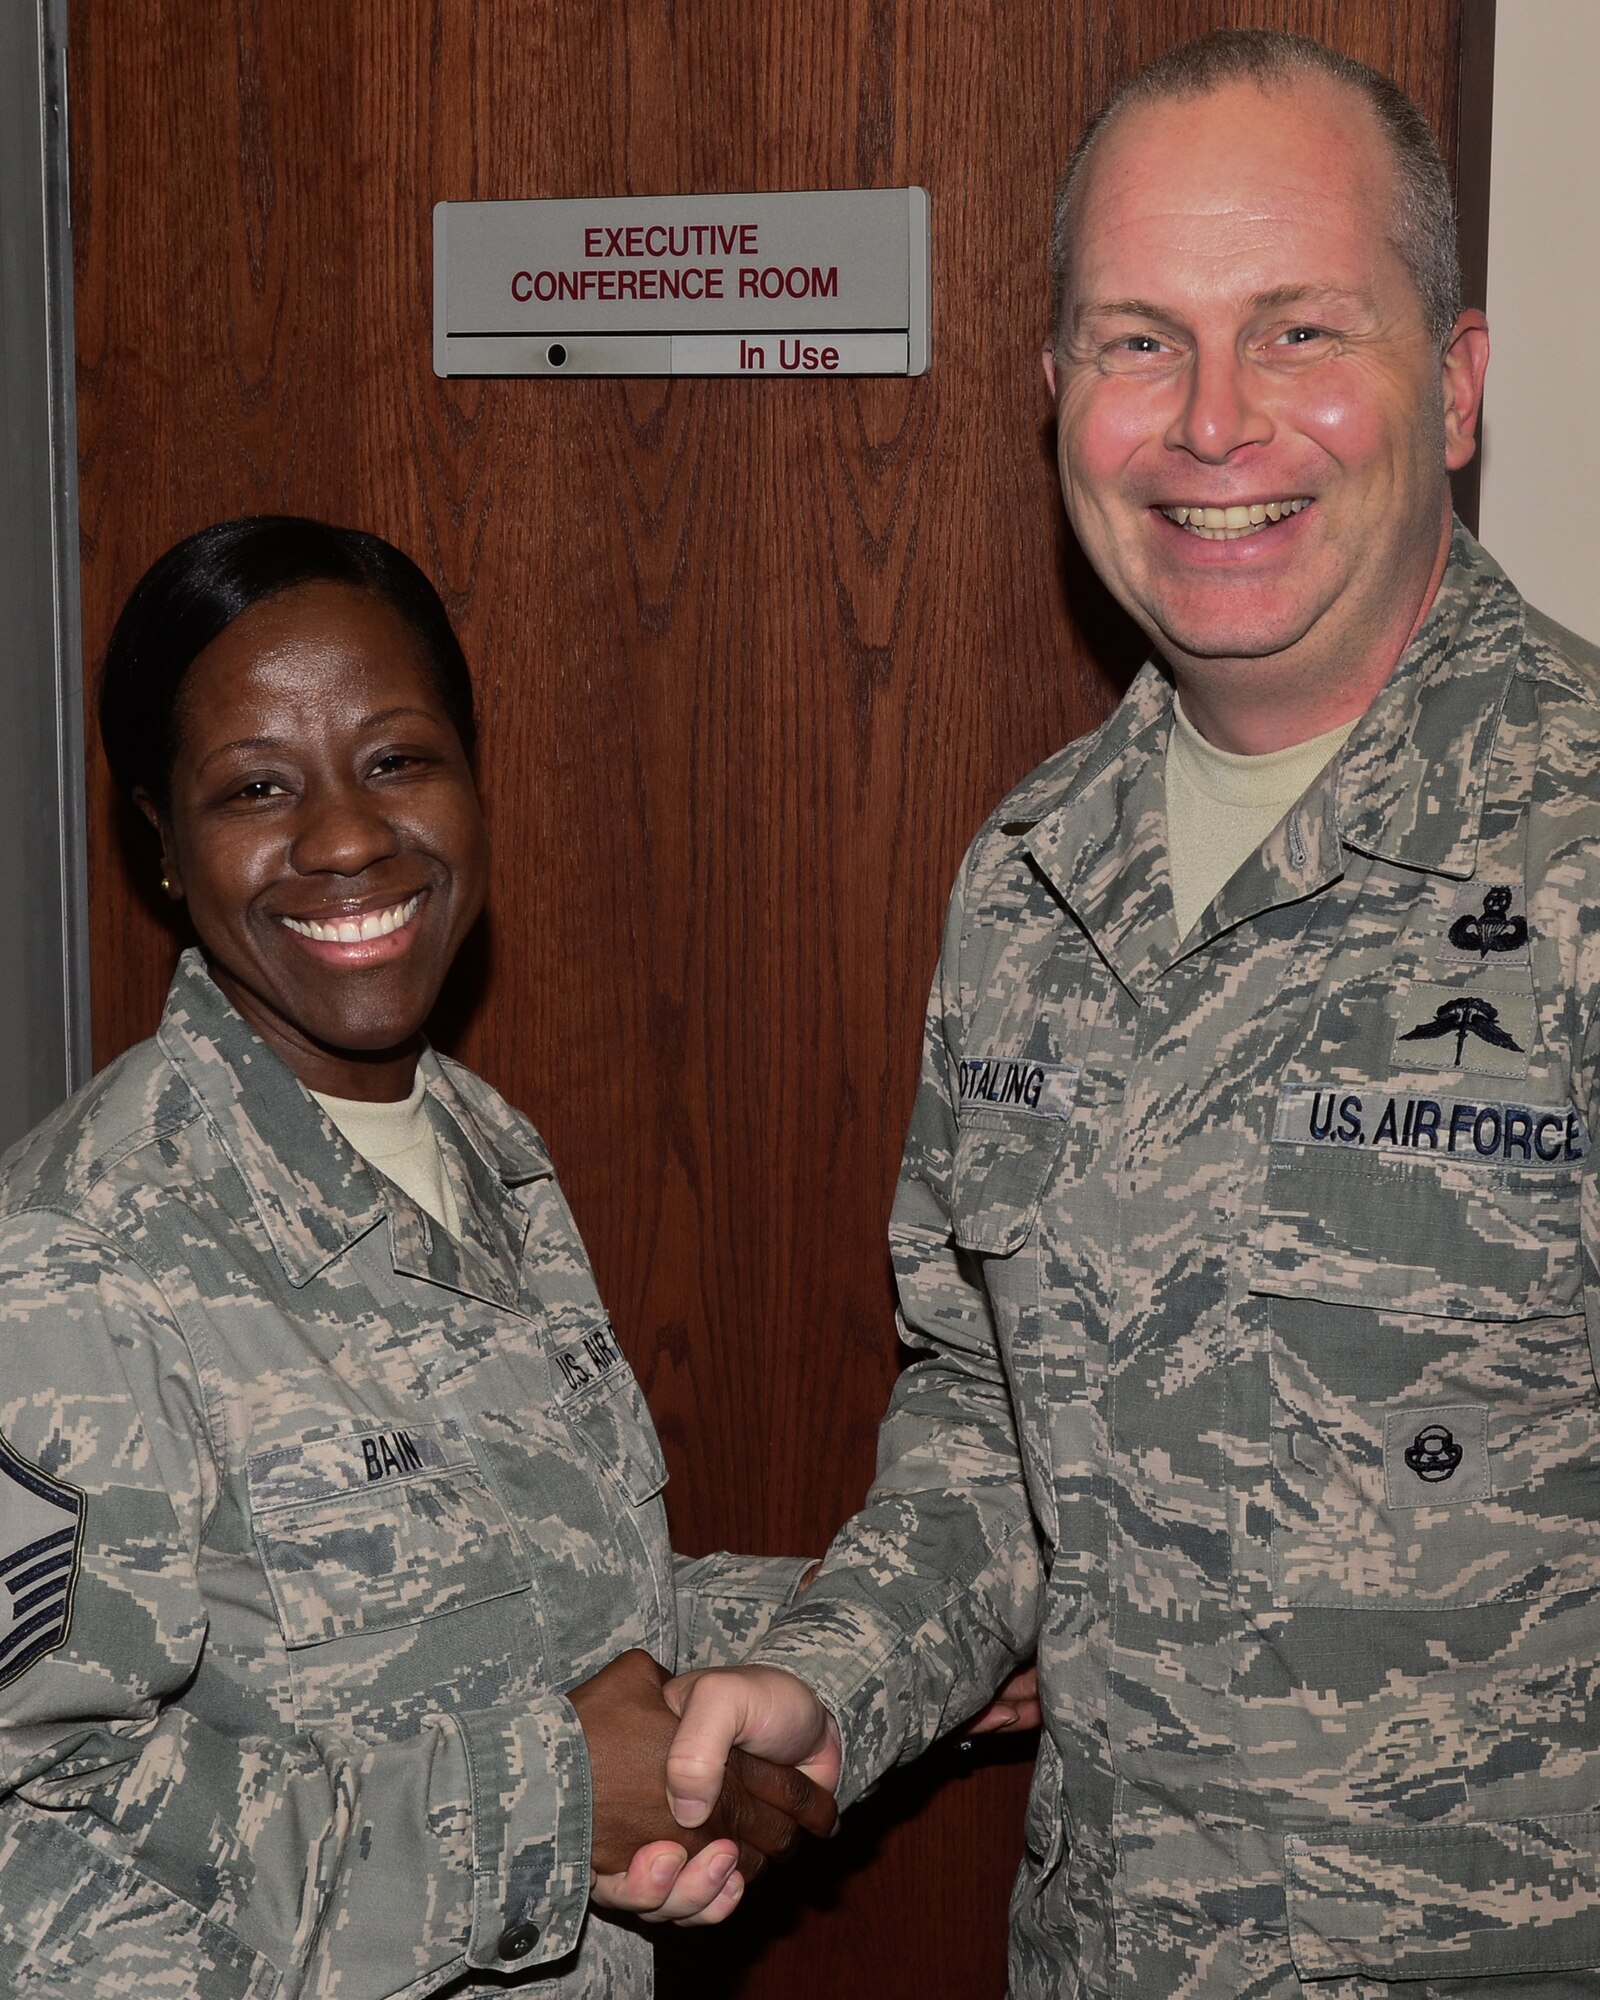 Master Sgt. Chena Bain, 166th Airlift Wing, Delaware Air National Guard is coined by ANG Command Chief Master Sgt. James Hotaling during a visit to the New Castle ANG Base, Delaware on Oct. 18, 2014 (U.S. Air National Guard photo by Staff Sgt. Andrew Horgan)